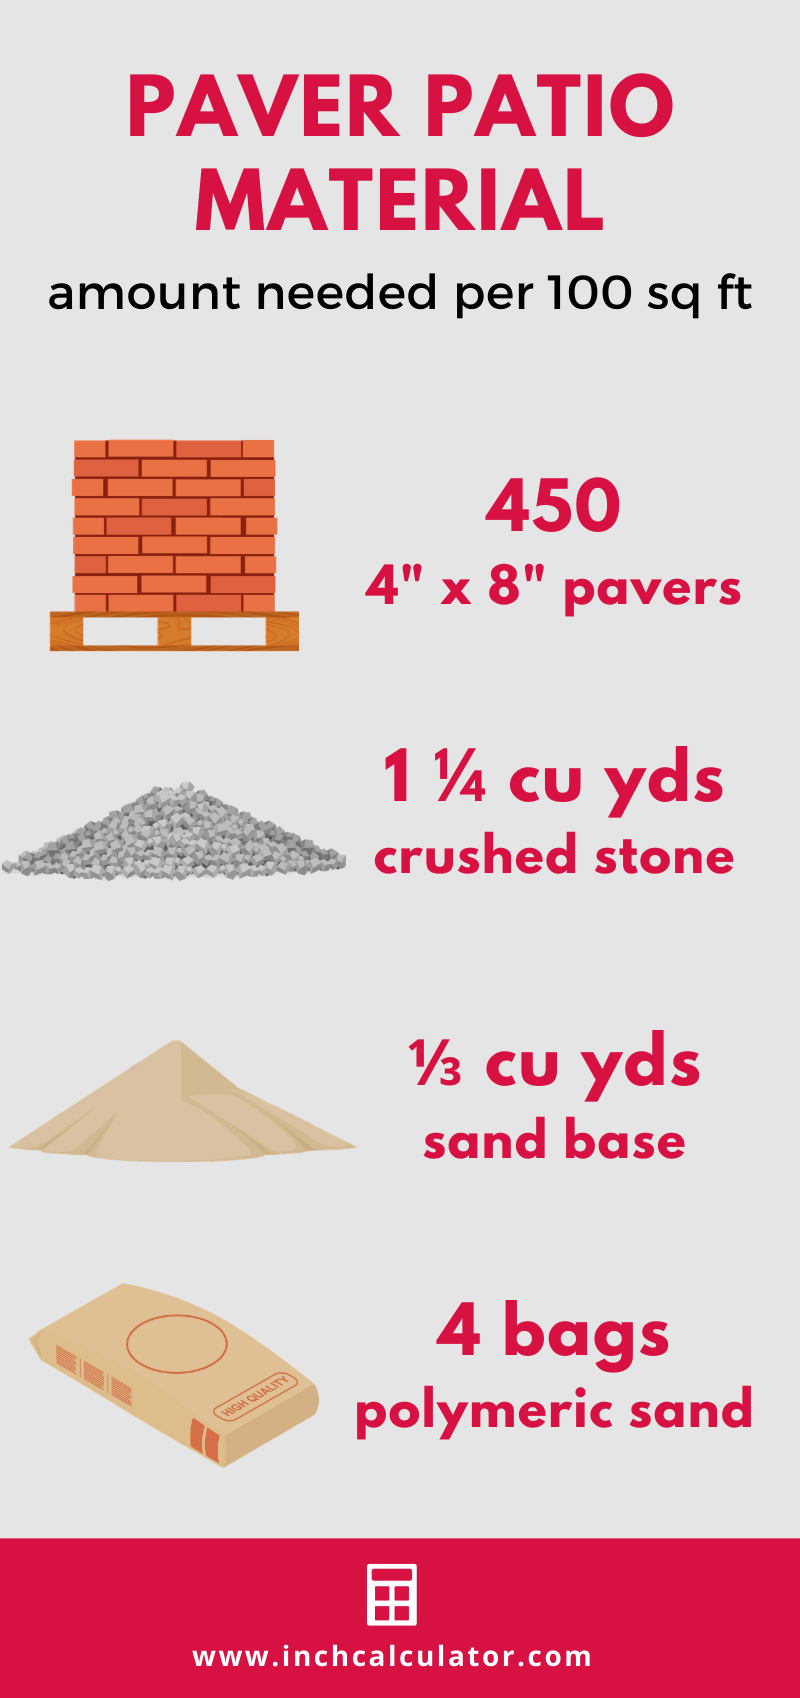 Infographic showing the number of pavers, yards of sand and gravel, and bags of polymeric sand are needed per 100 sq ft of paver patio